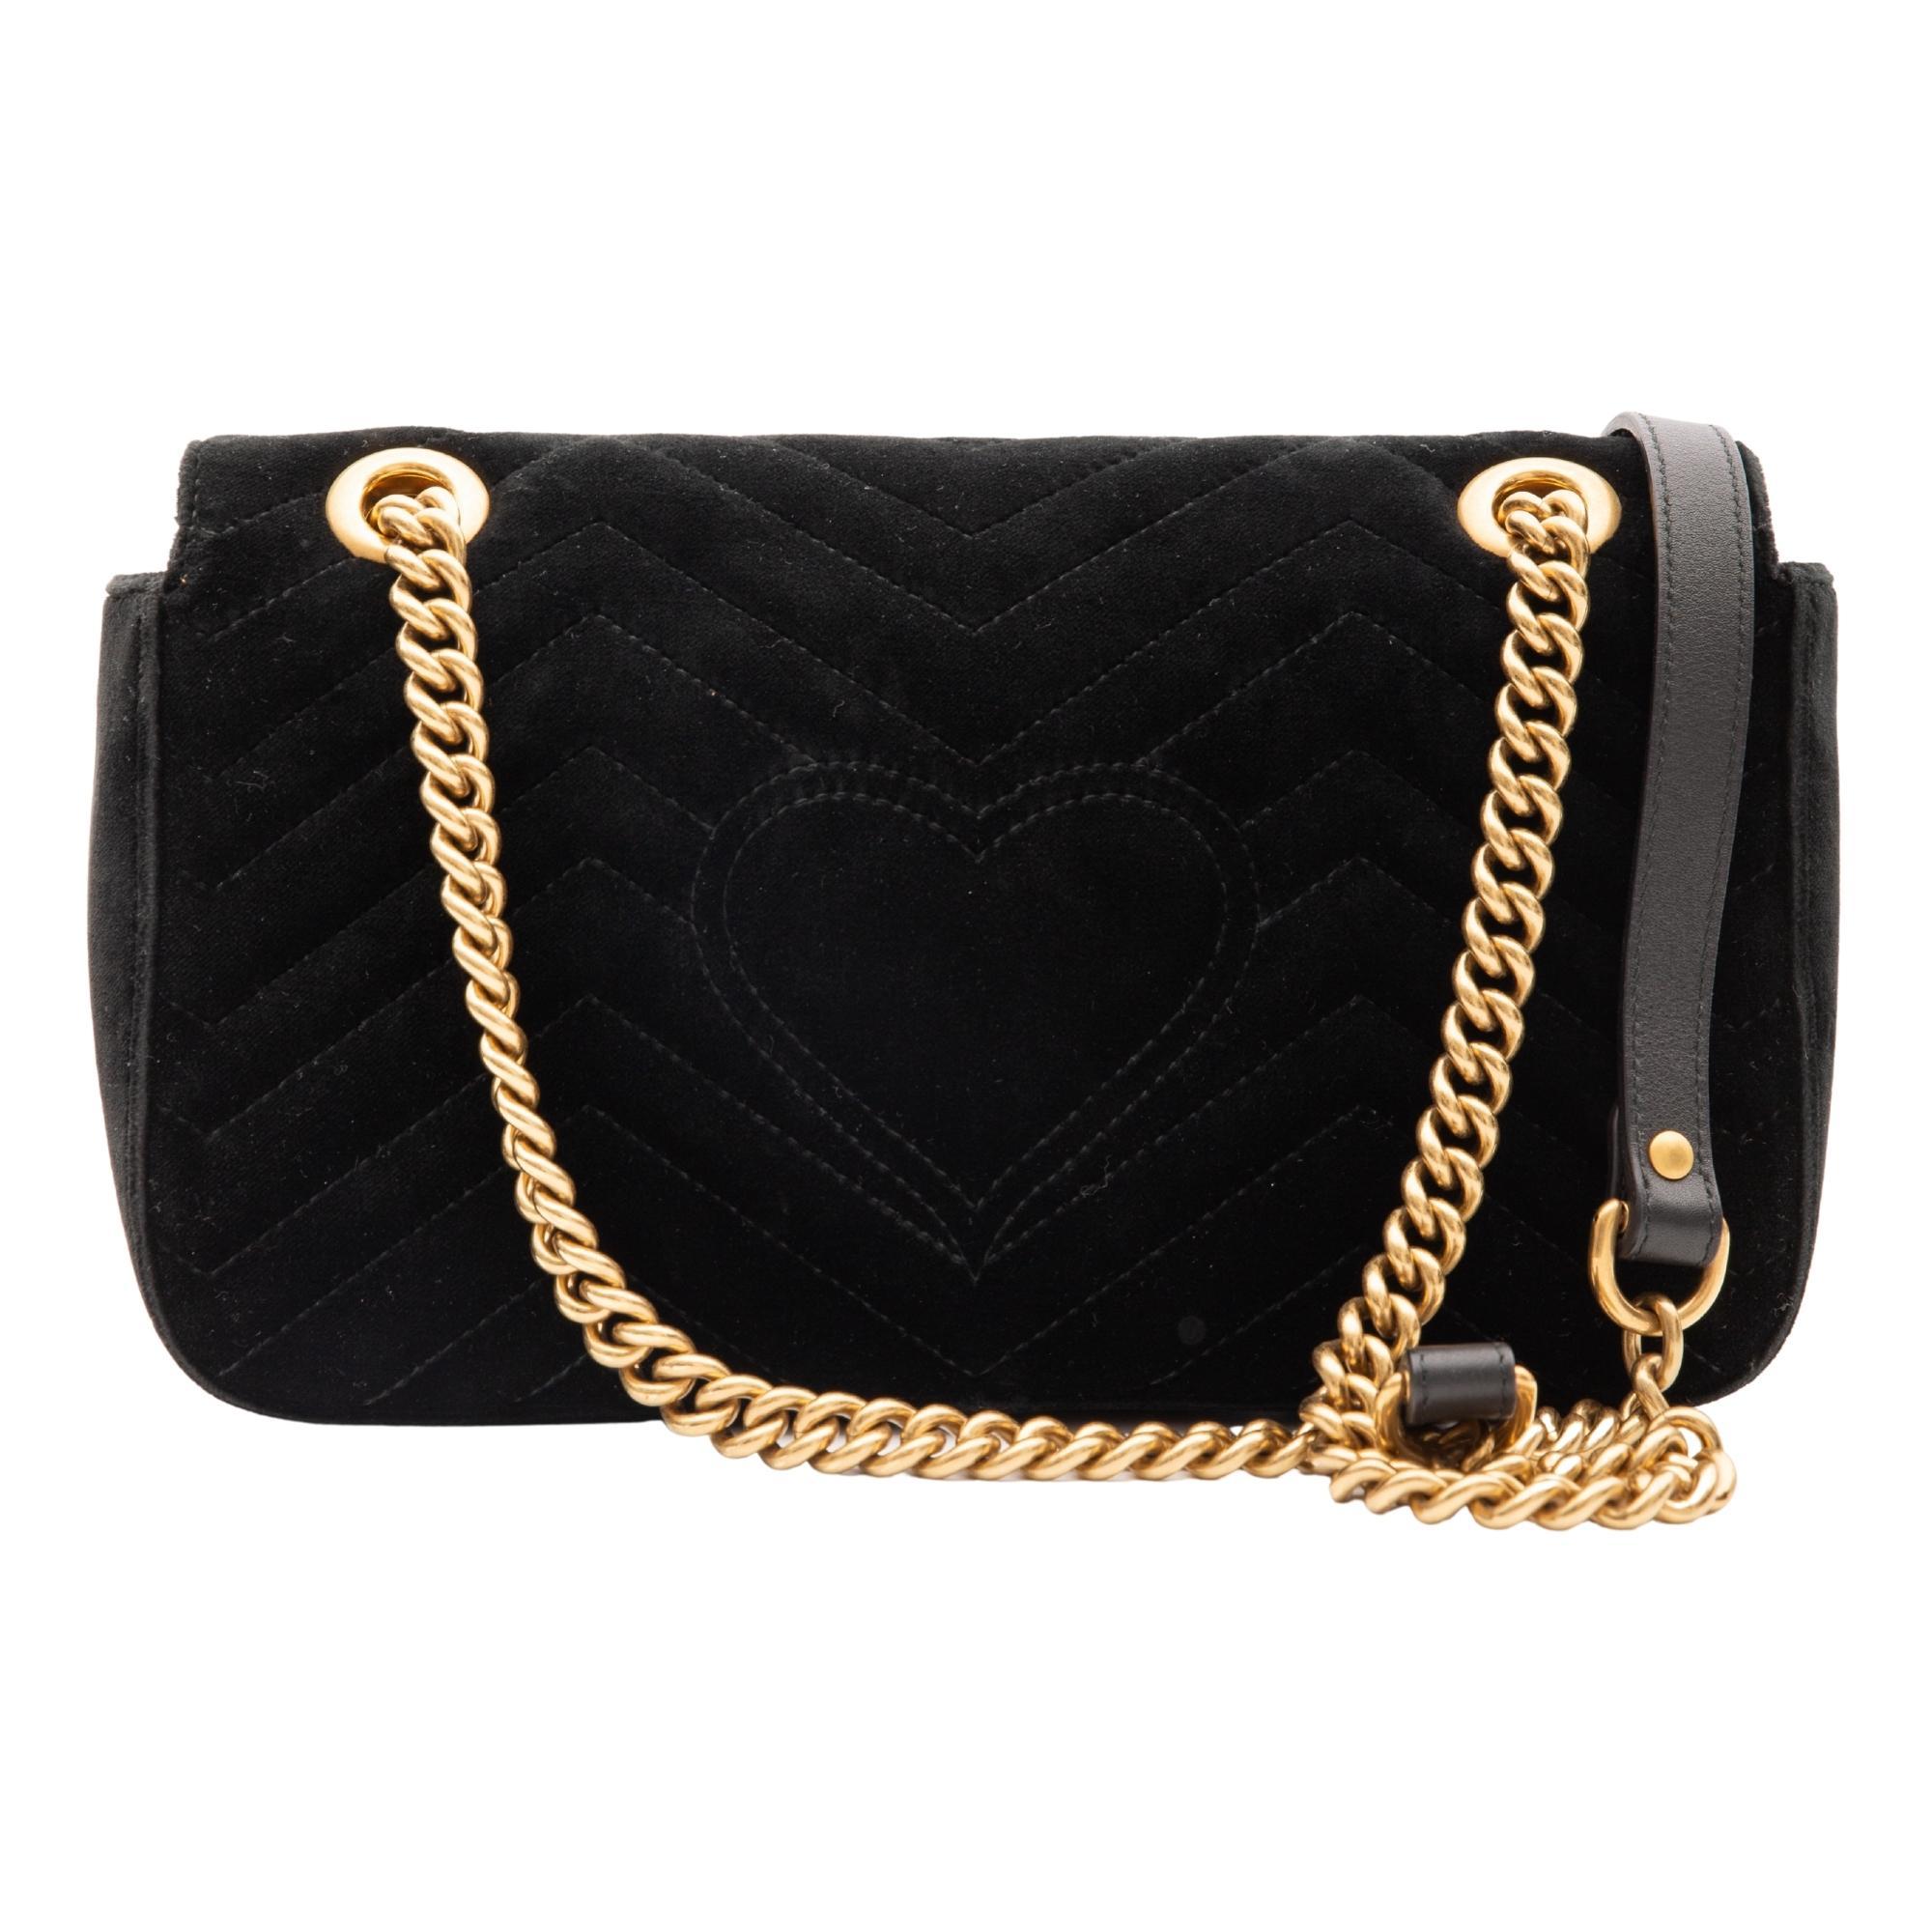 This shoulder bag is made of soft velvet in black. This bag features a long aged gold chain shoulder strap with a leather shoulder pad. The front cross over flap features an interlocking GG logo that opens to a pink satin fabric interior with a